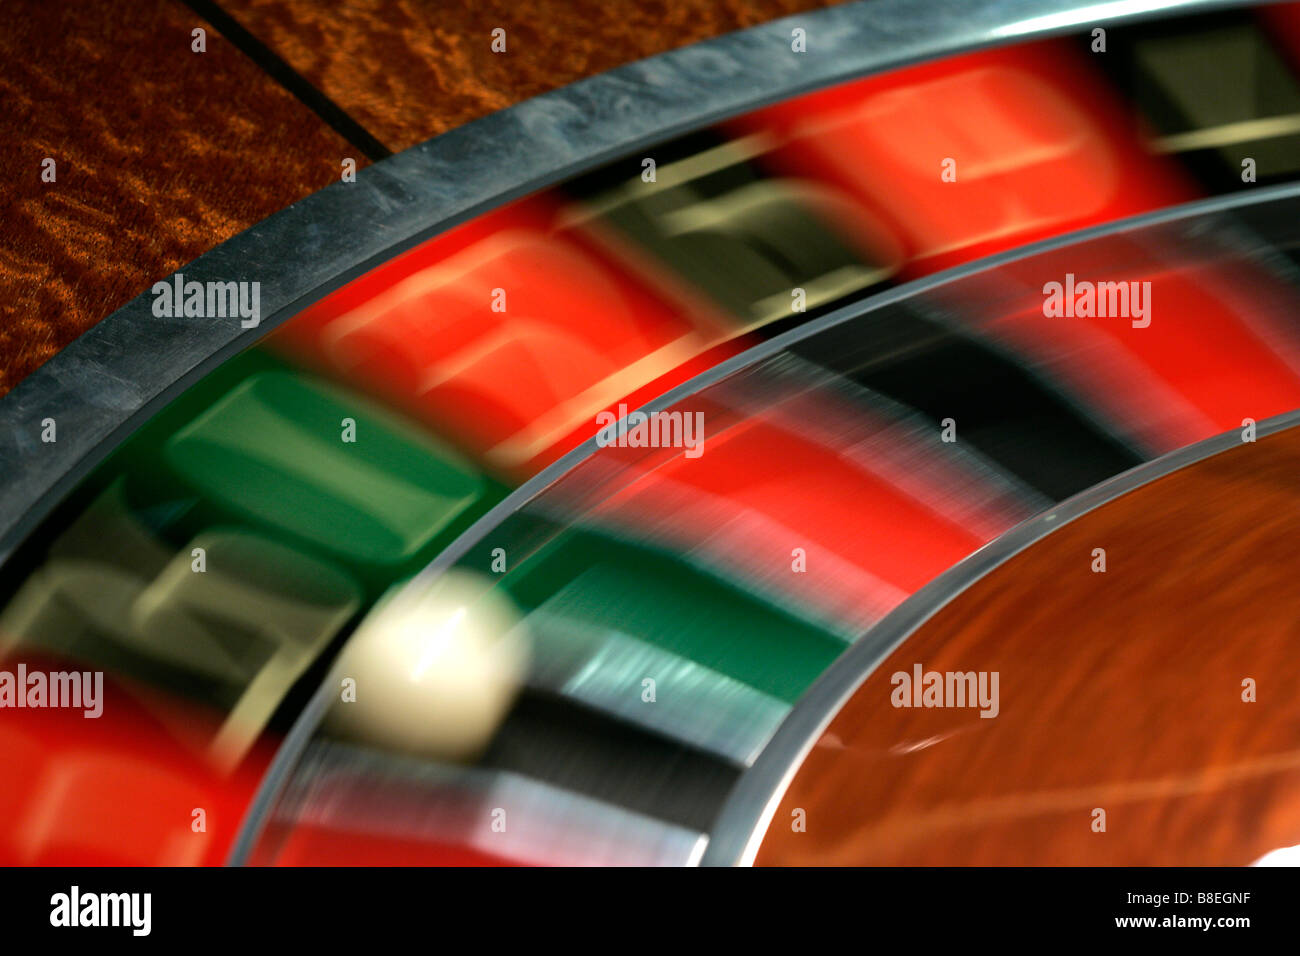 casino roulette gambling dolly chip money close up detail Stock Photo